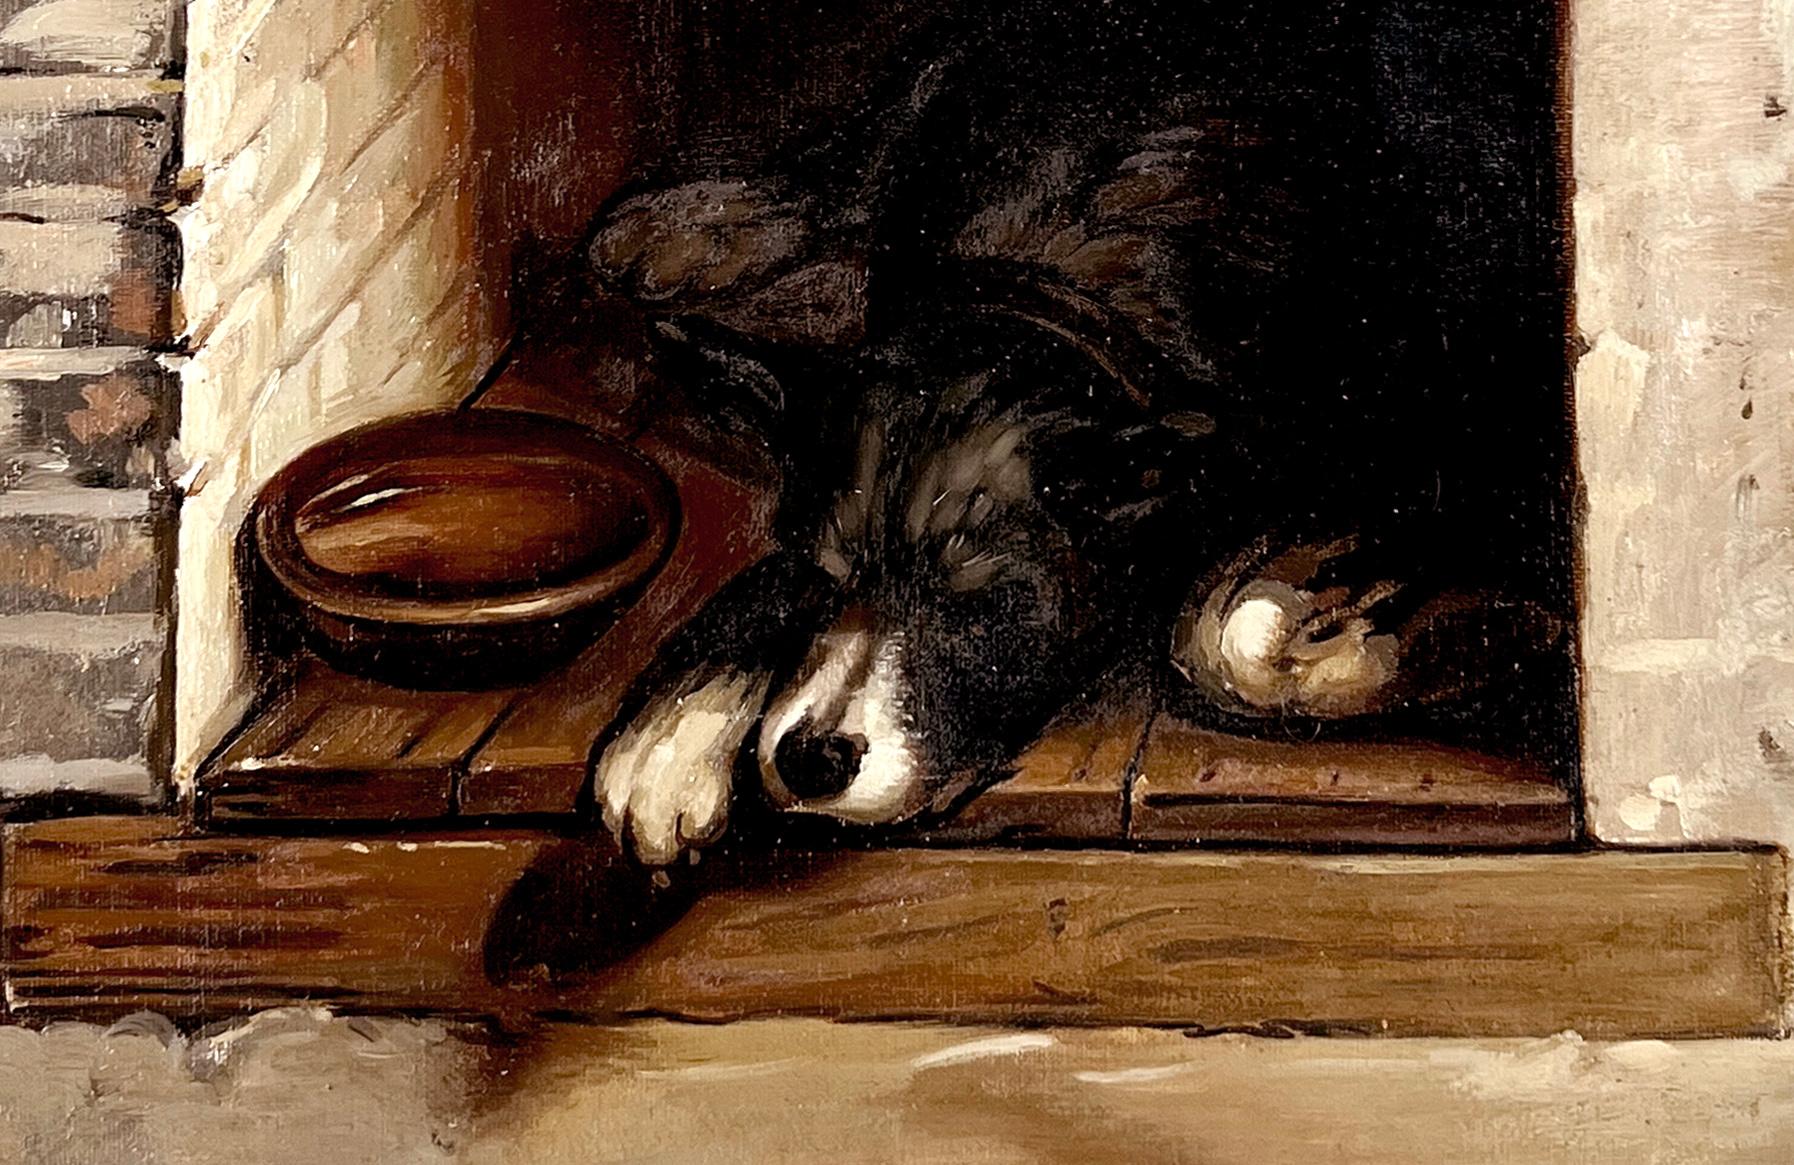 Sleeping Spaniel in the Hearth Italian Figural Dog Painting oil on Linen
Exceptional painting of a sleeping Spaniel in a Hearth by Italian artist Tito Corbella (Italy, 1885-1966), well executed with flourishes of impasto for detail.  (we show an